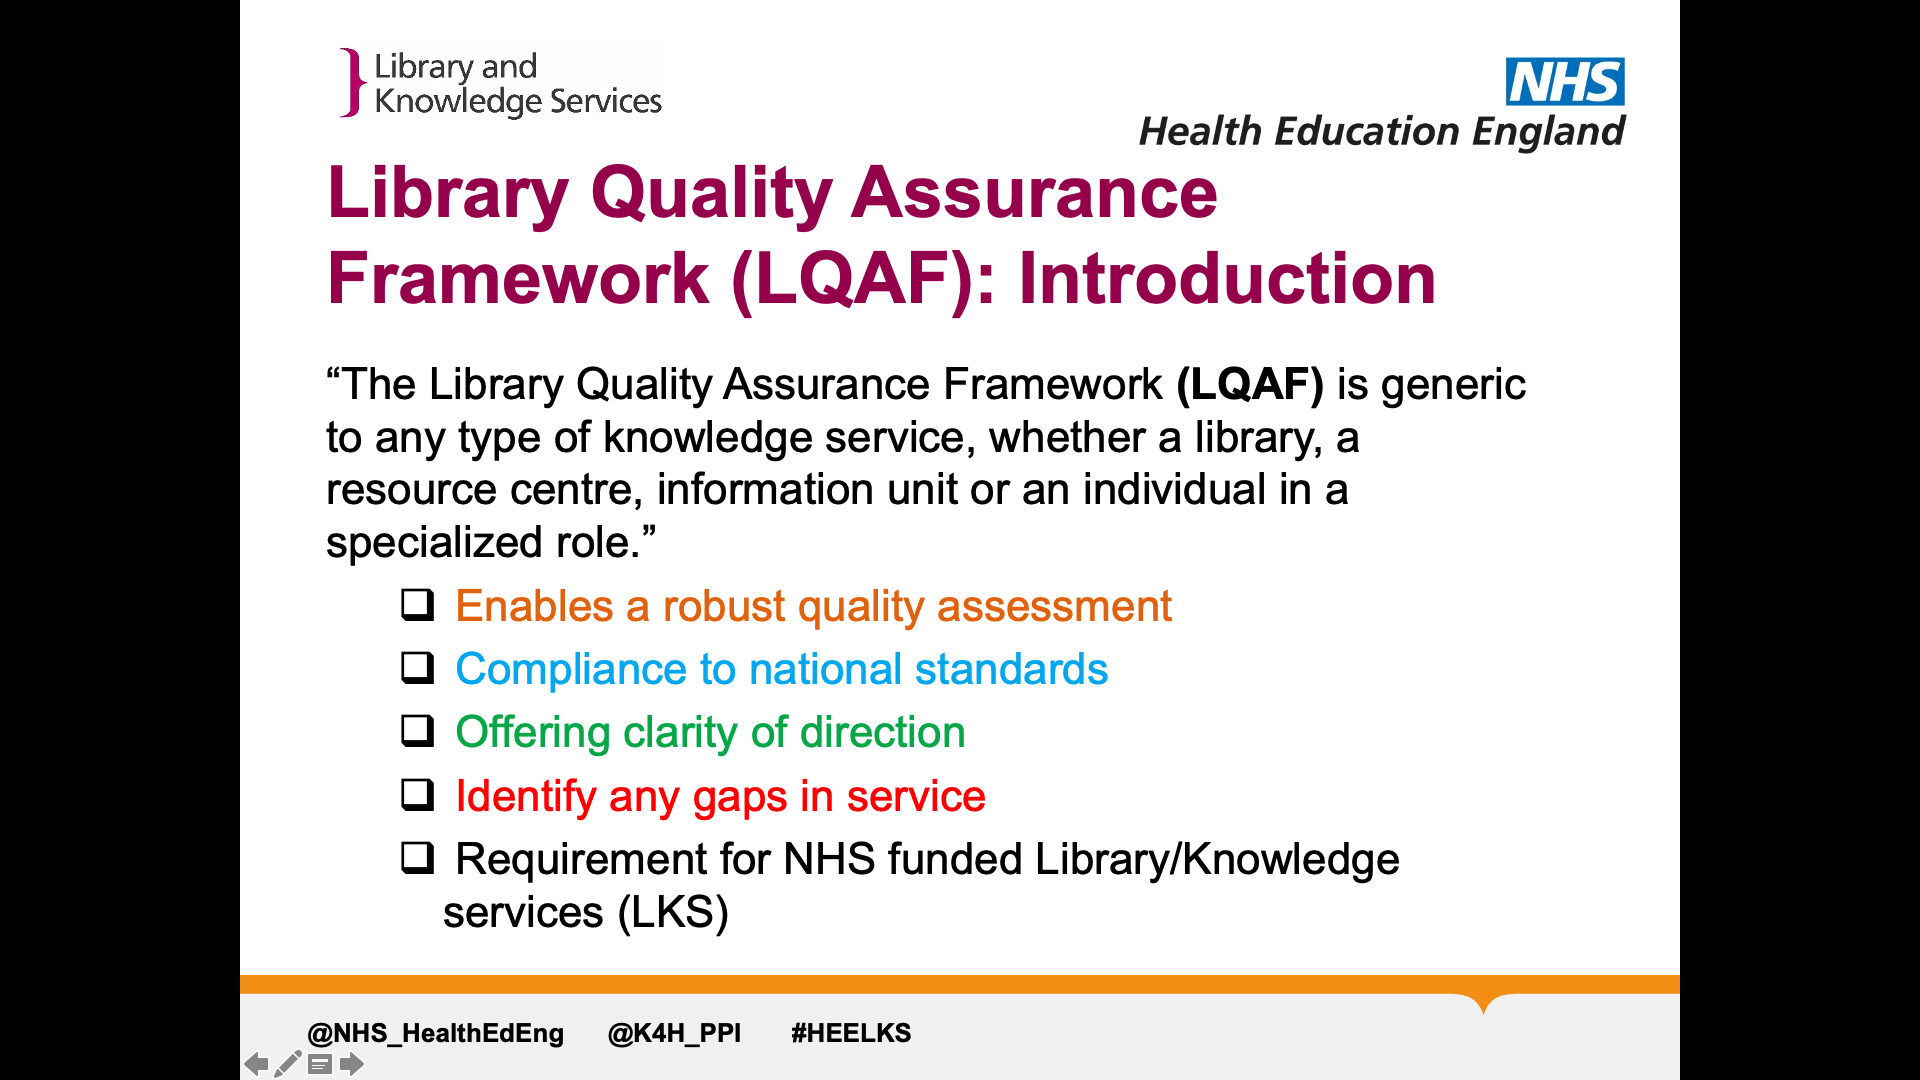 Text on page: Library Quality Assurance Framework (LQAF): Introduction “The Library Quality Assurance Framework (LQAF) is generic to any type of knowledge service, whether a library, a resource centre, information unit or an individual in a specialized role.”  Enables a robust quality assessment   Compliance to national standards   Offering clarity of direction   Identify any gaps in service   Requirement for NHS funded Library/Knowledge services (LKS)